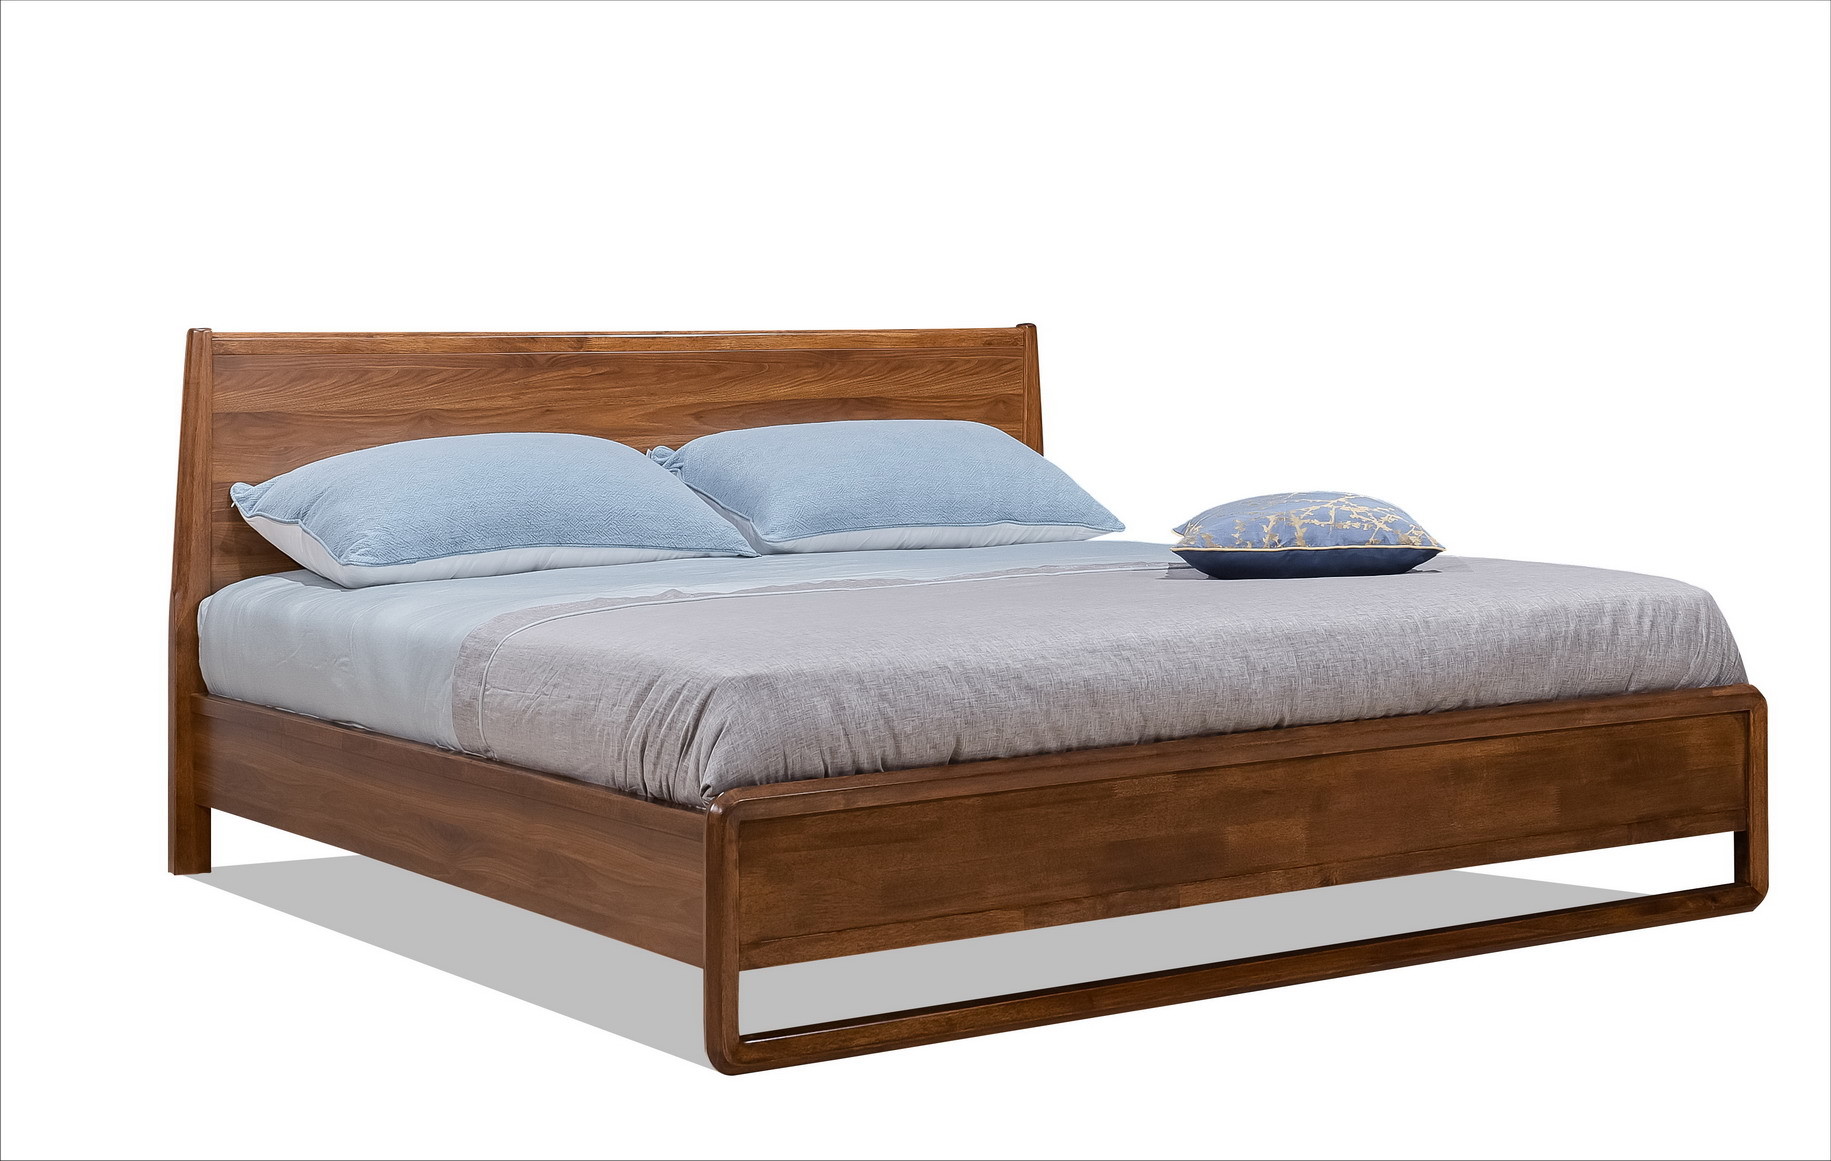 Best 2017 New design of  Doube / King bed Interior Fitment for Apartment Furniture by Walnut wood from China factory wholesale